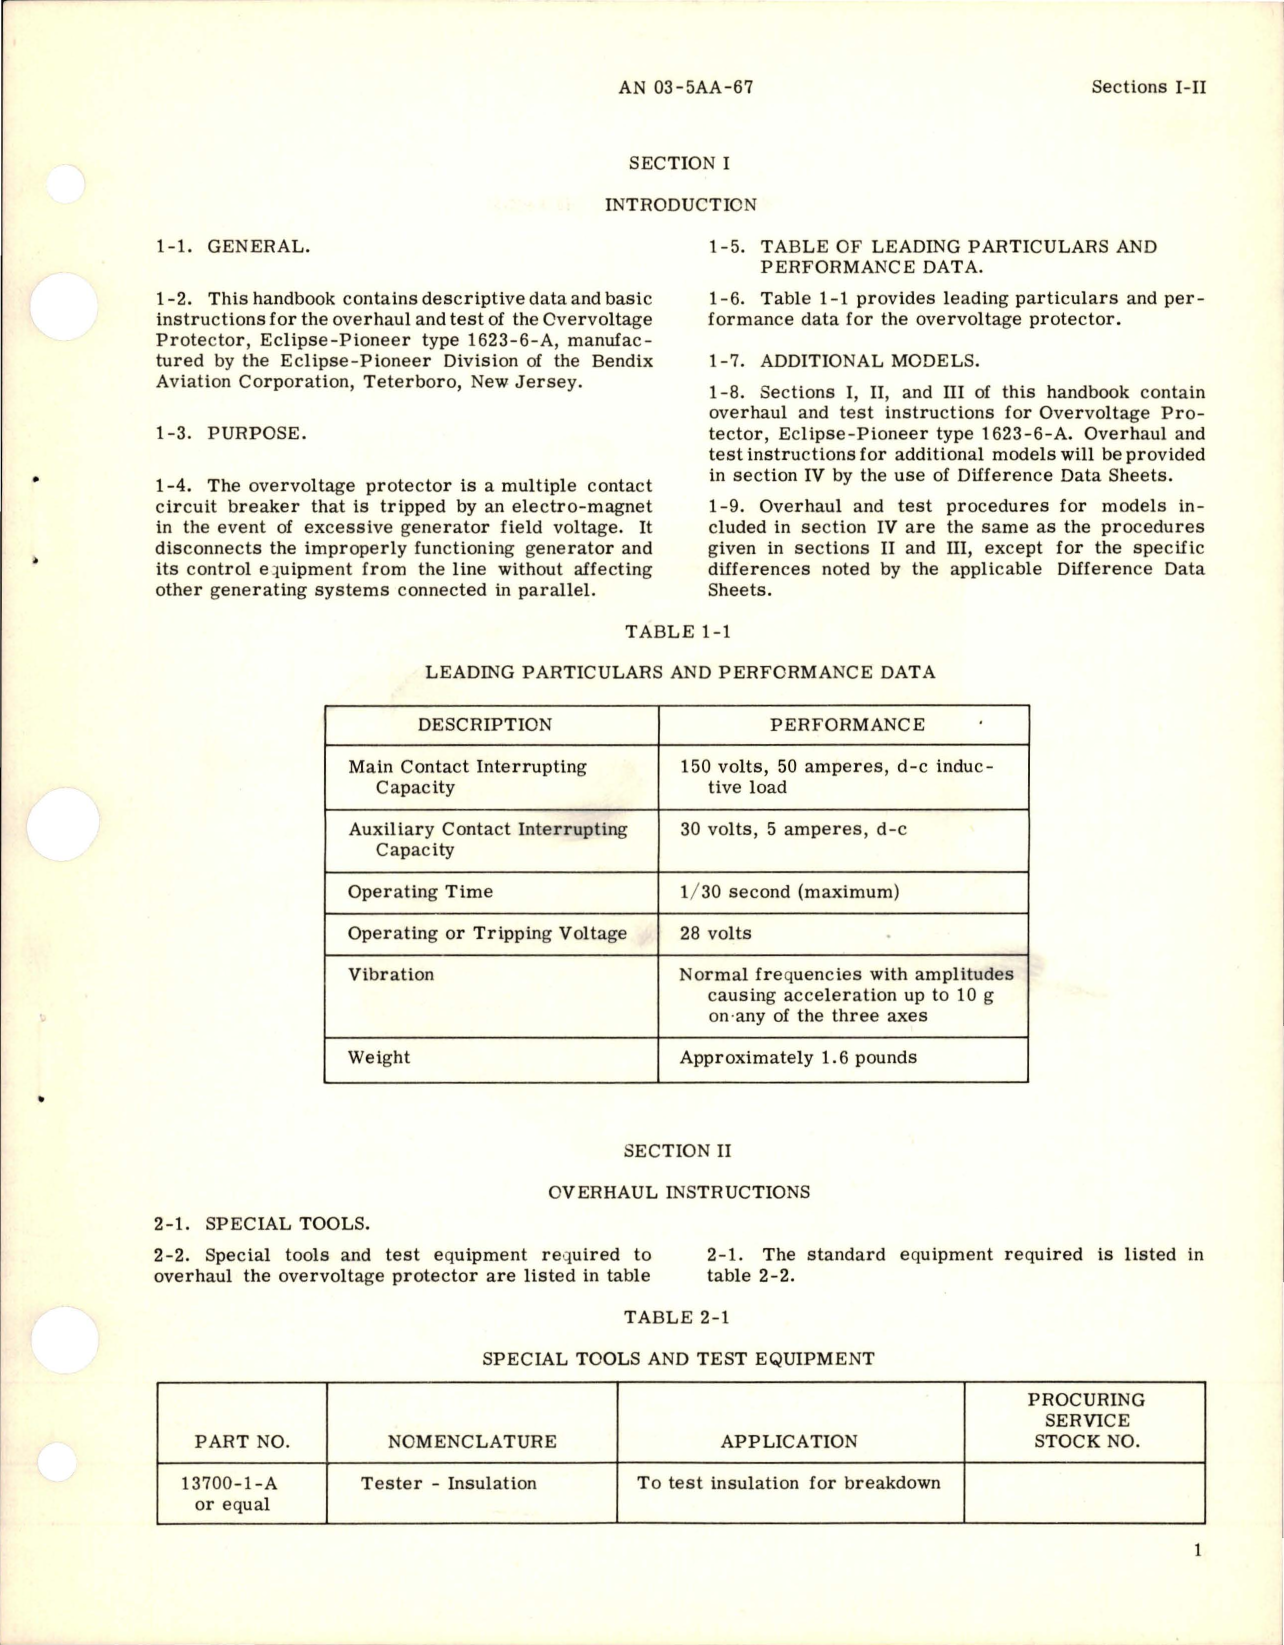 Sample page 5 from AirCorps Library document: Overhaul Instructions for Overvoltage Protector - Part 1623-6-A